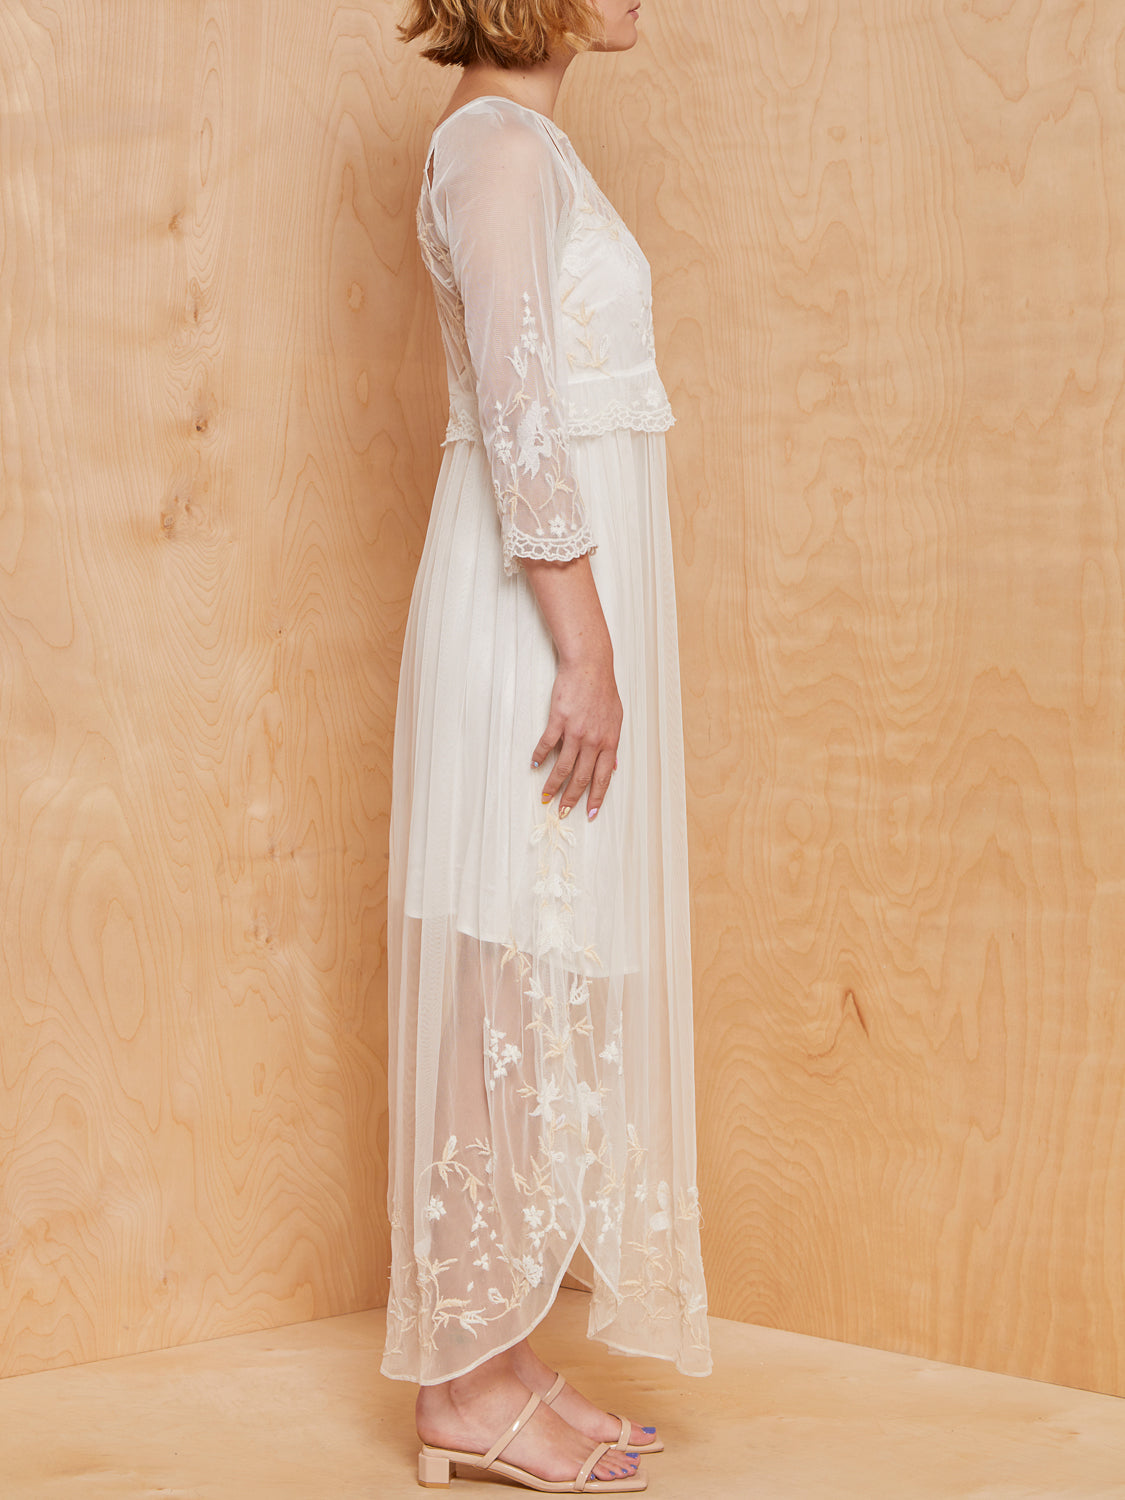 Free People Sheer Dress with Embroidery